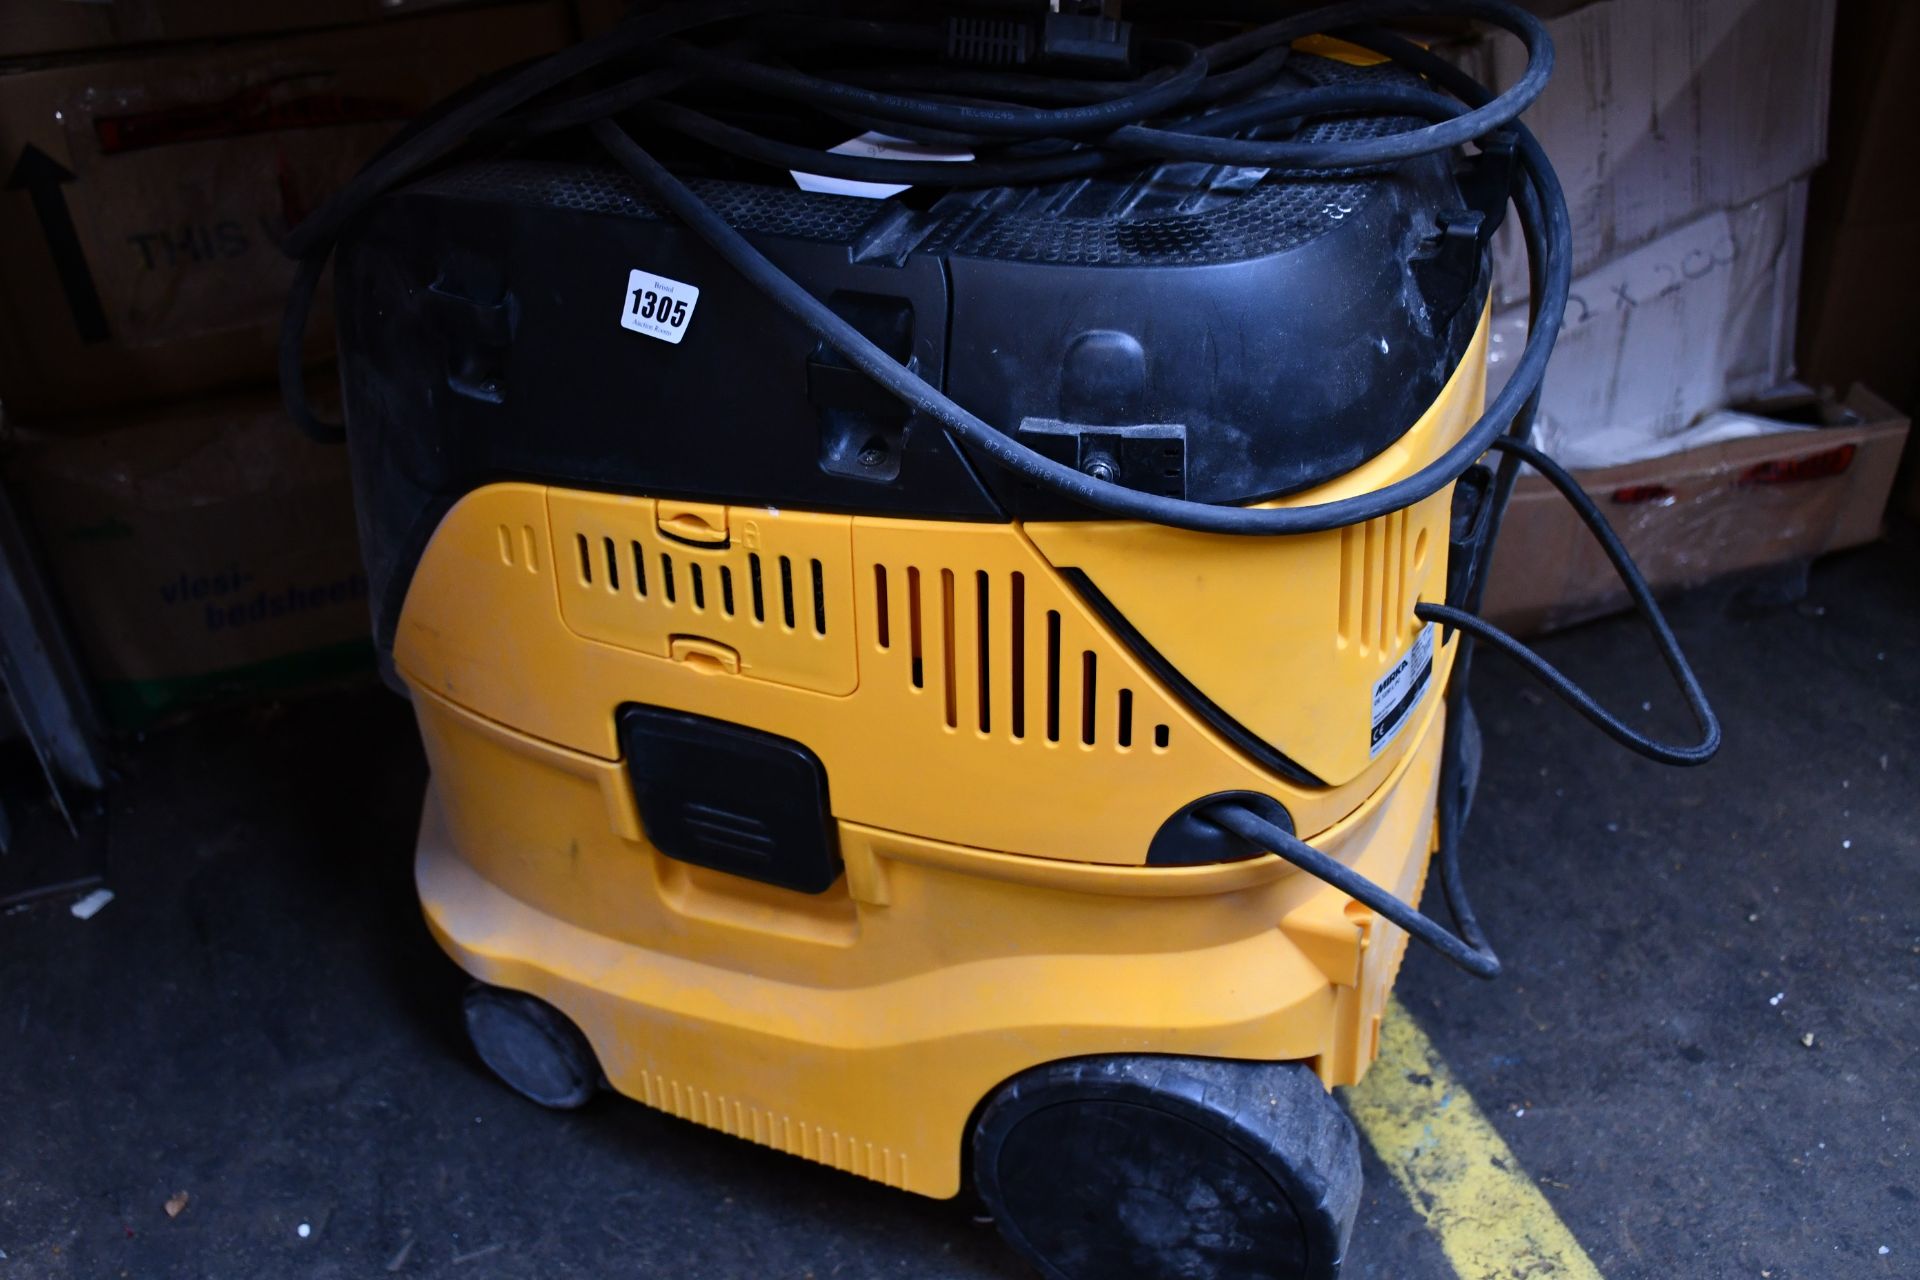 One pre-owned Mirka DE 1230 L Push & Clean dust extractor (Requires new plug).